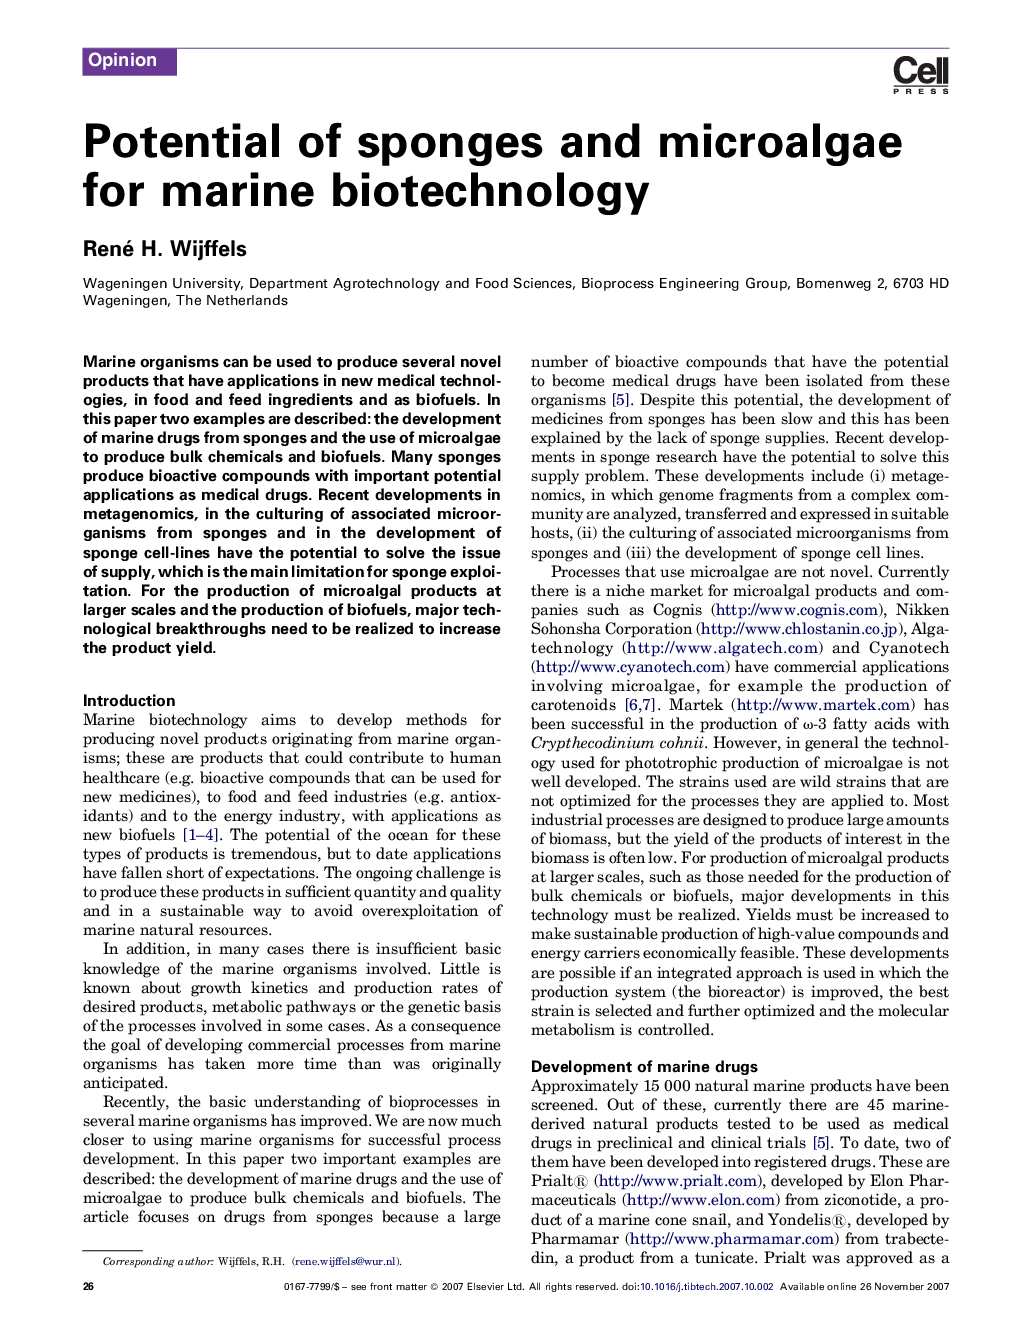 Potential of sponges and microalgae for marine biotechnology